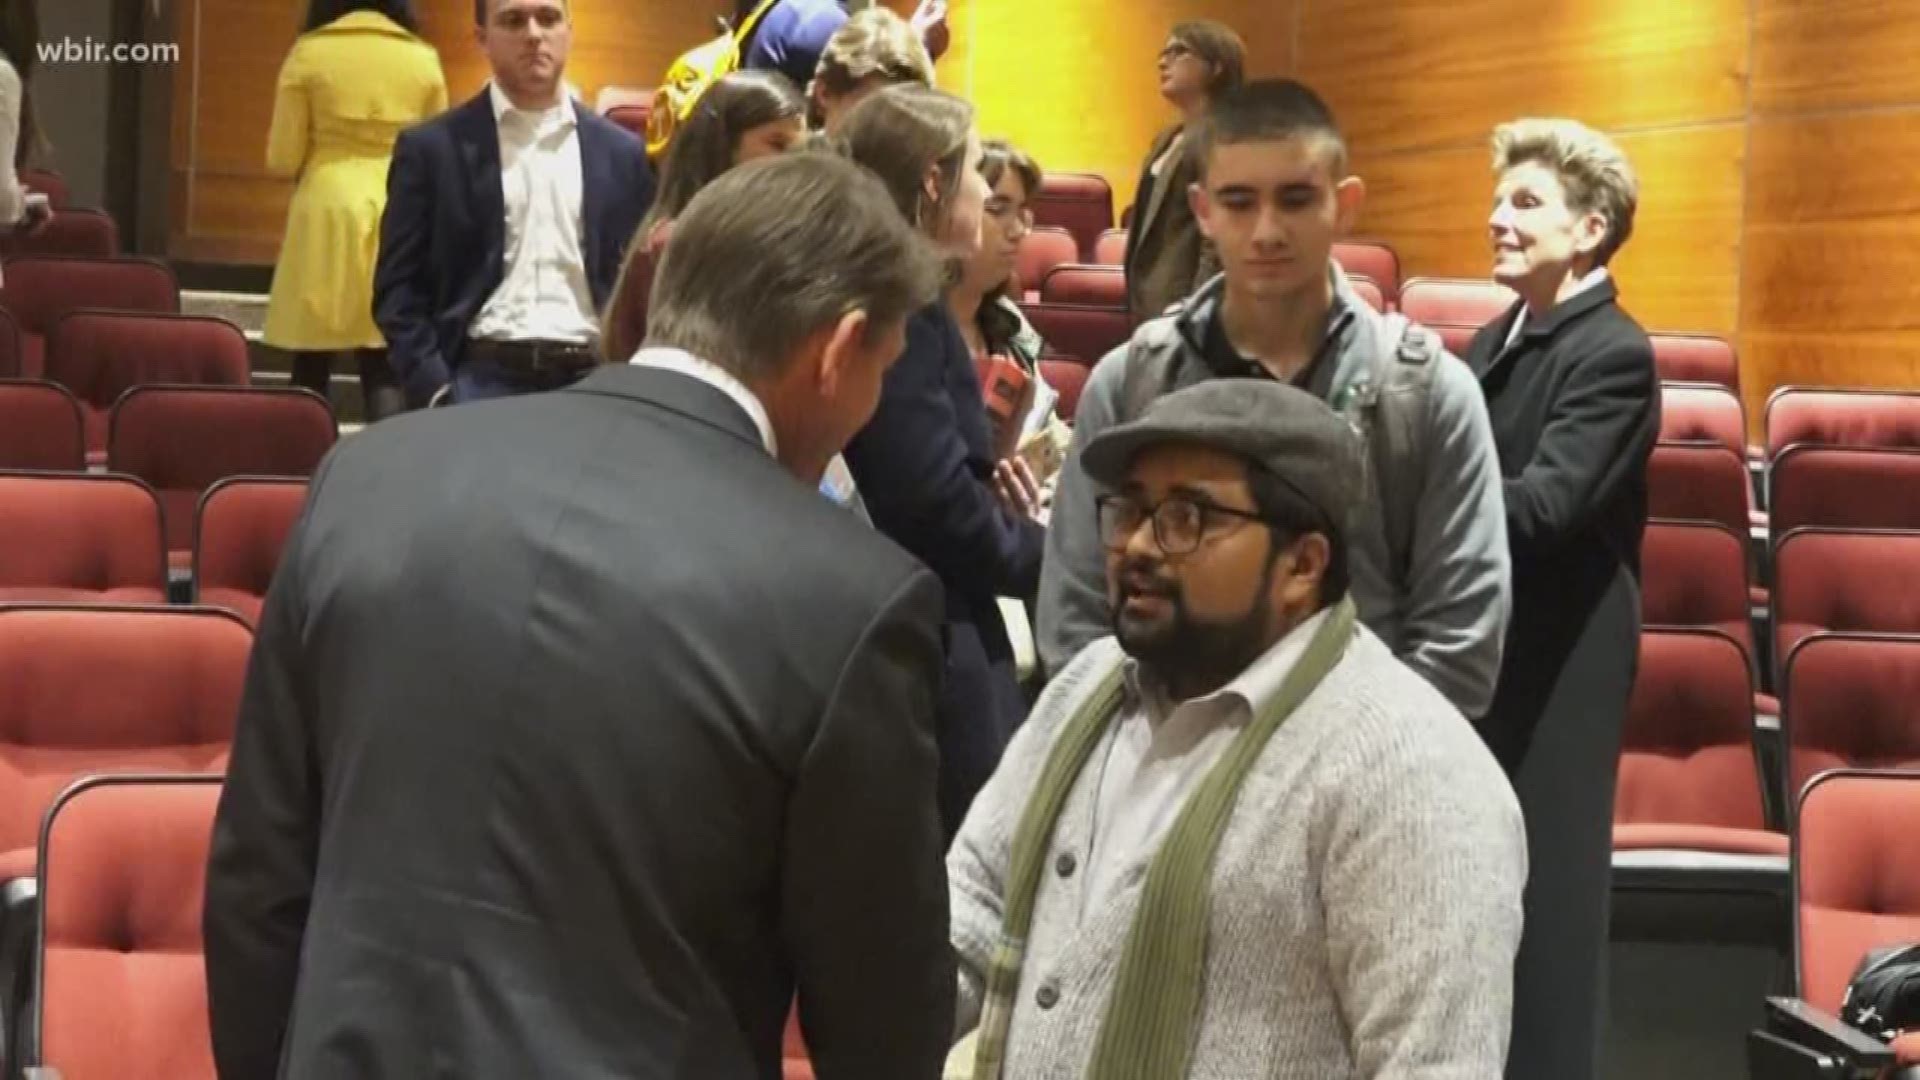 UT students are making their campus concerns known to new interim UT system president Randy Boyd